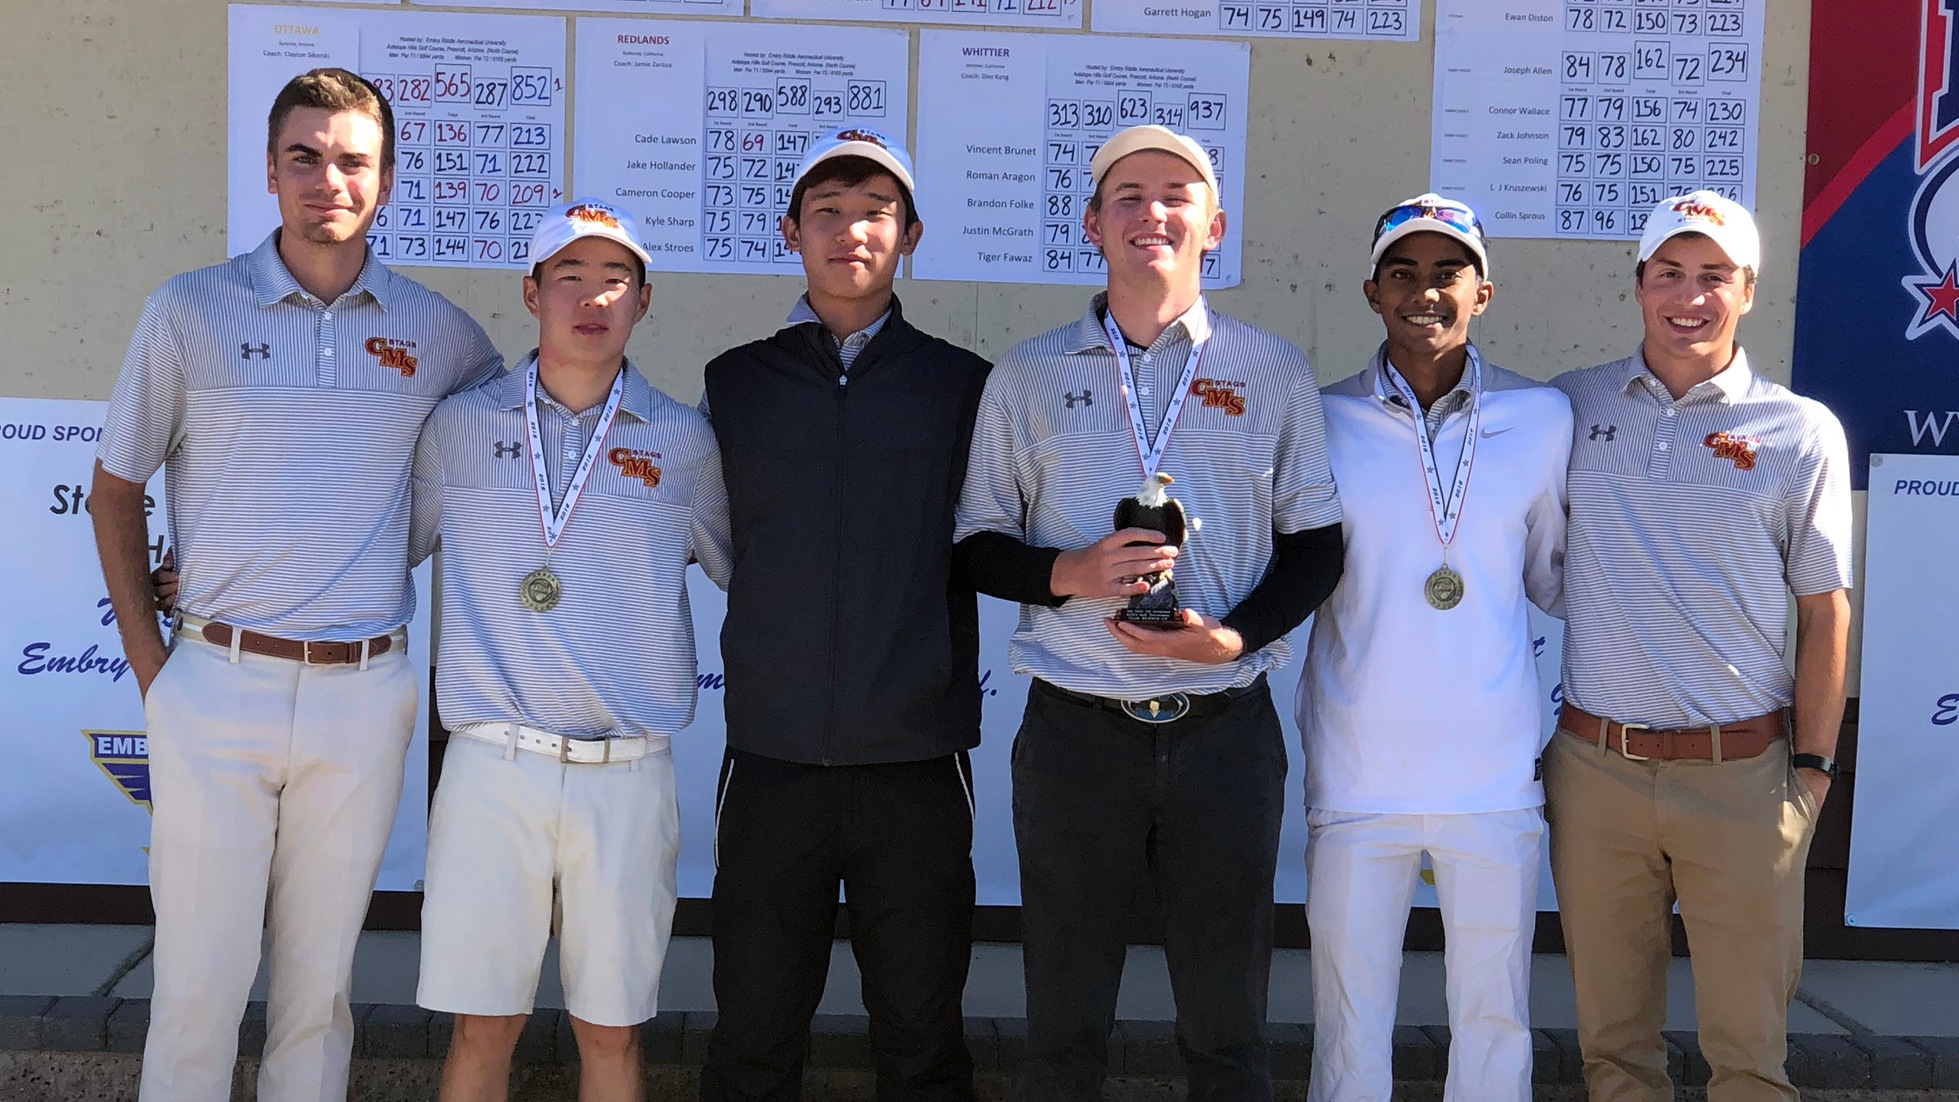 CMS Men's Golf Finishes Second at Embry-Riddle Invite with Three of Top Four Individuals